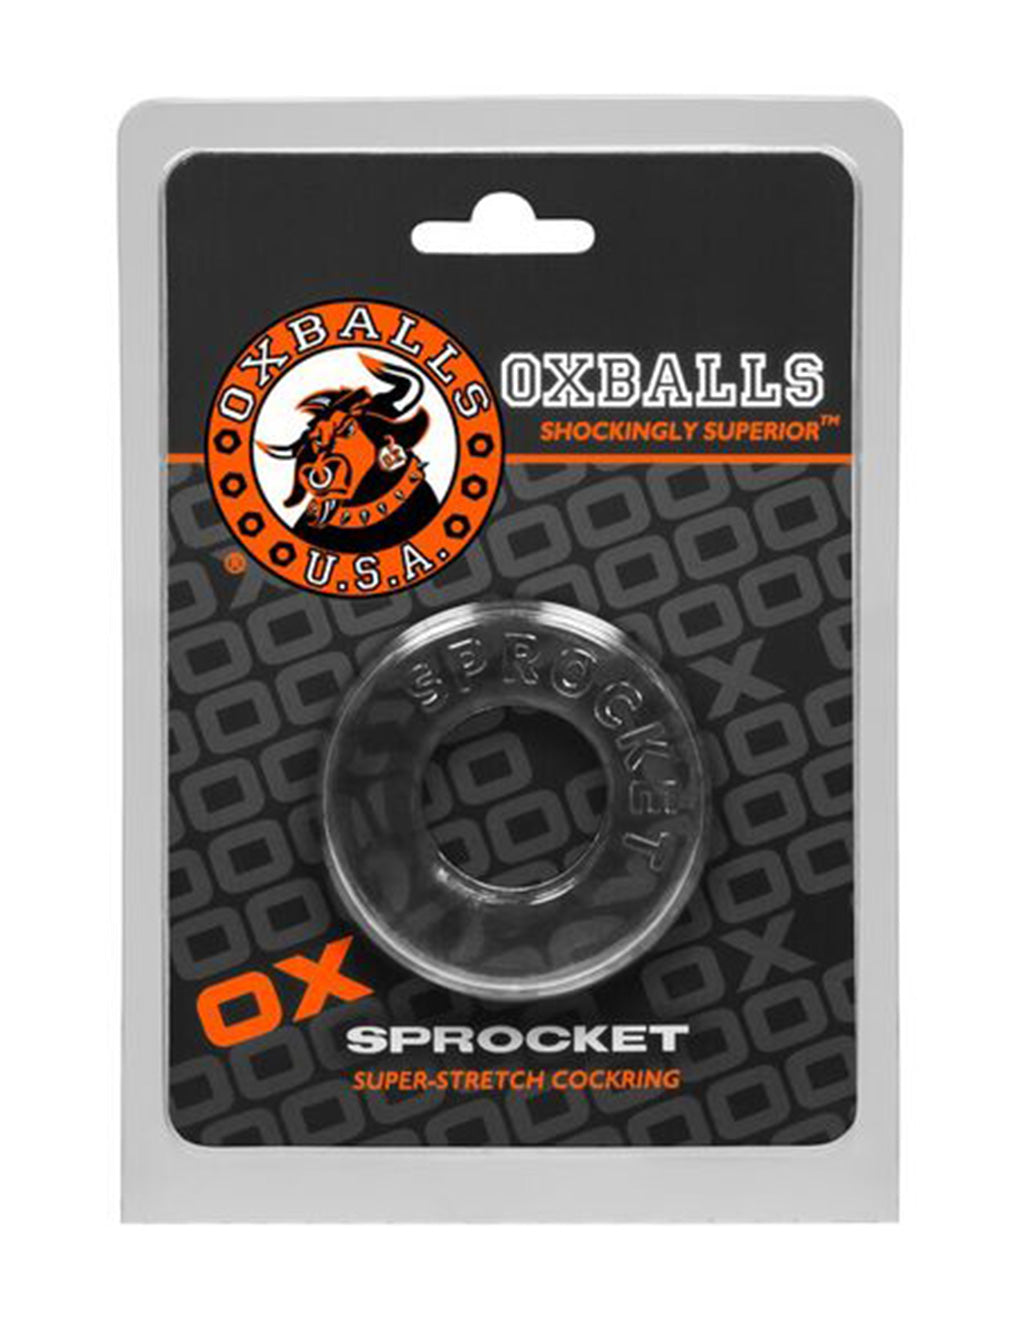 Oxballs Sprocket Cockring- Clear- Package